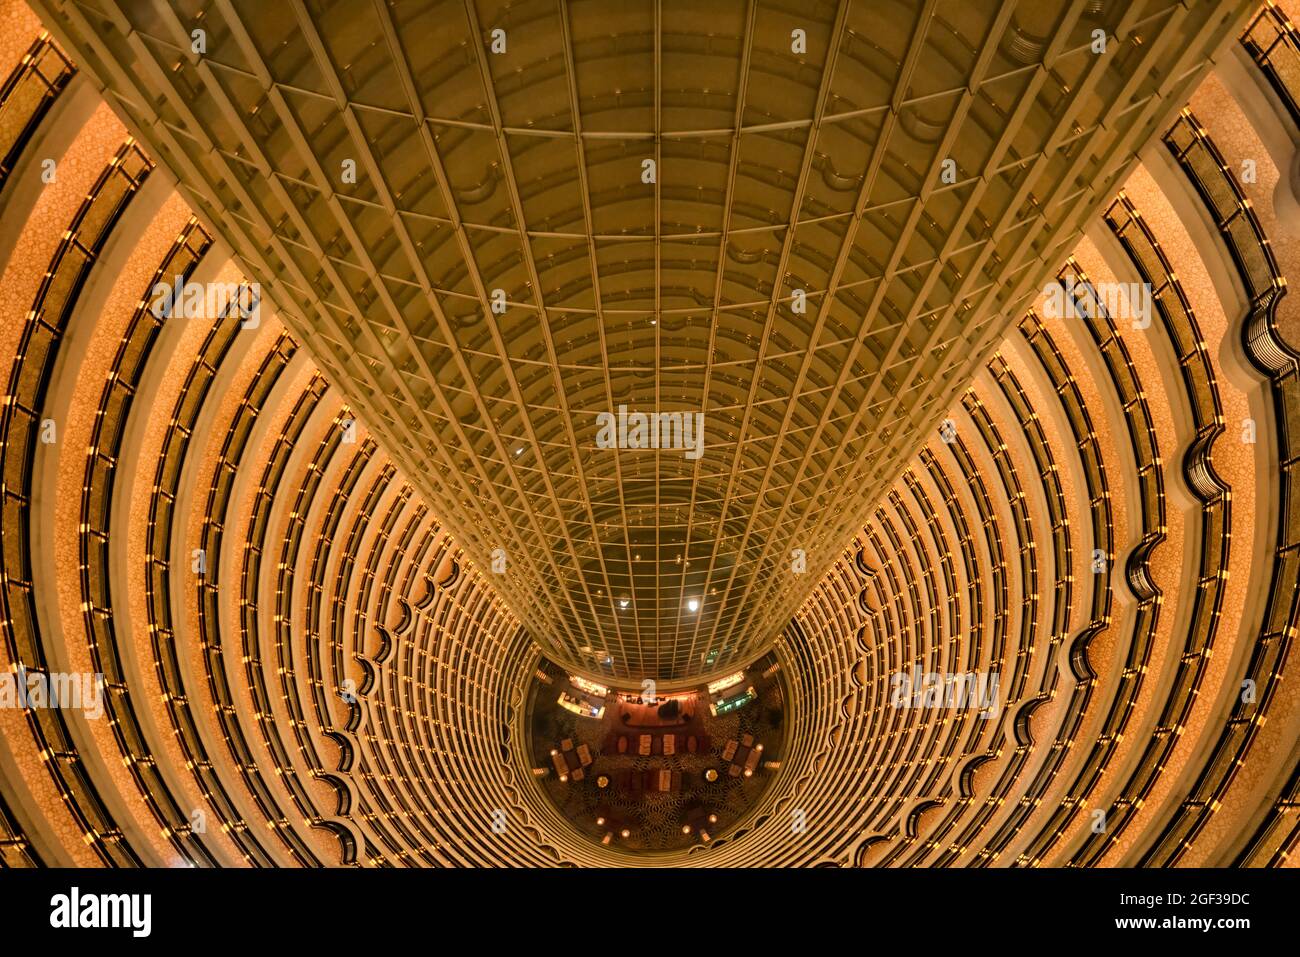 Shanghai, China - August 17, 2011: View from above of the spectacular atrium of the Grand Hyatt hotel in the Jin Mao Tower Stock Photo